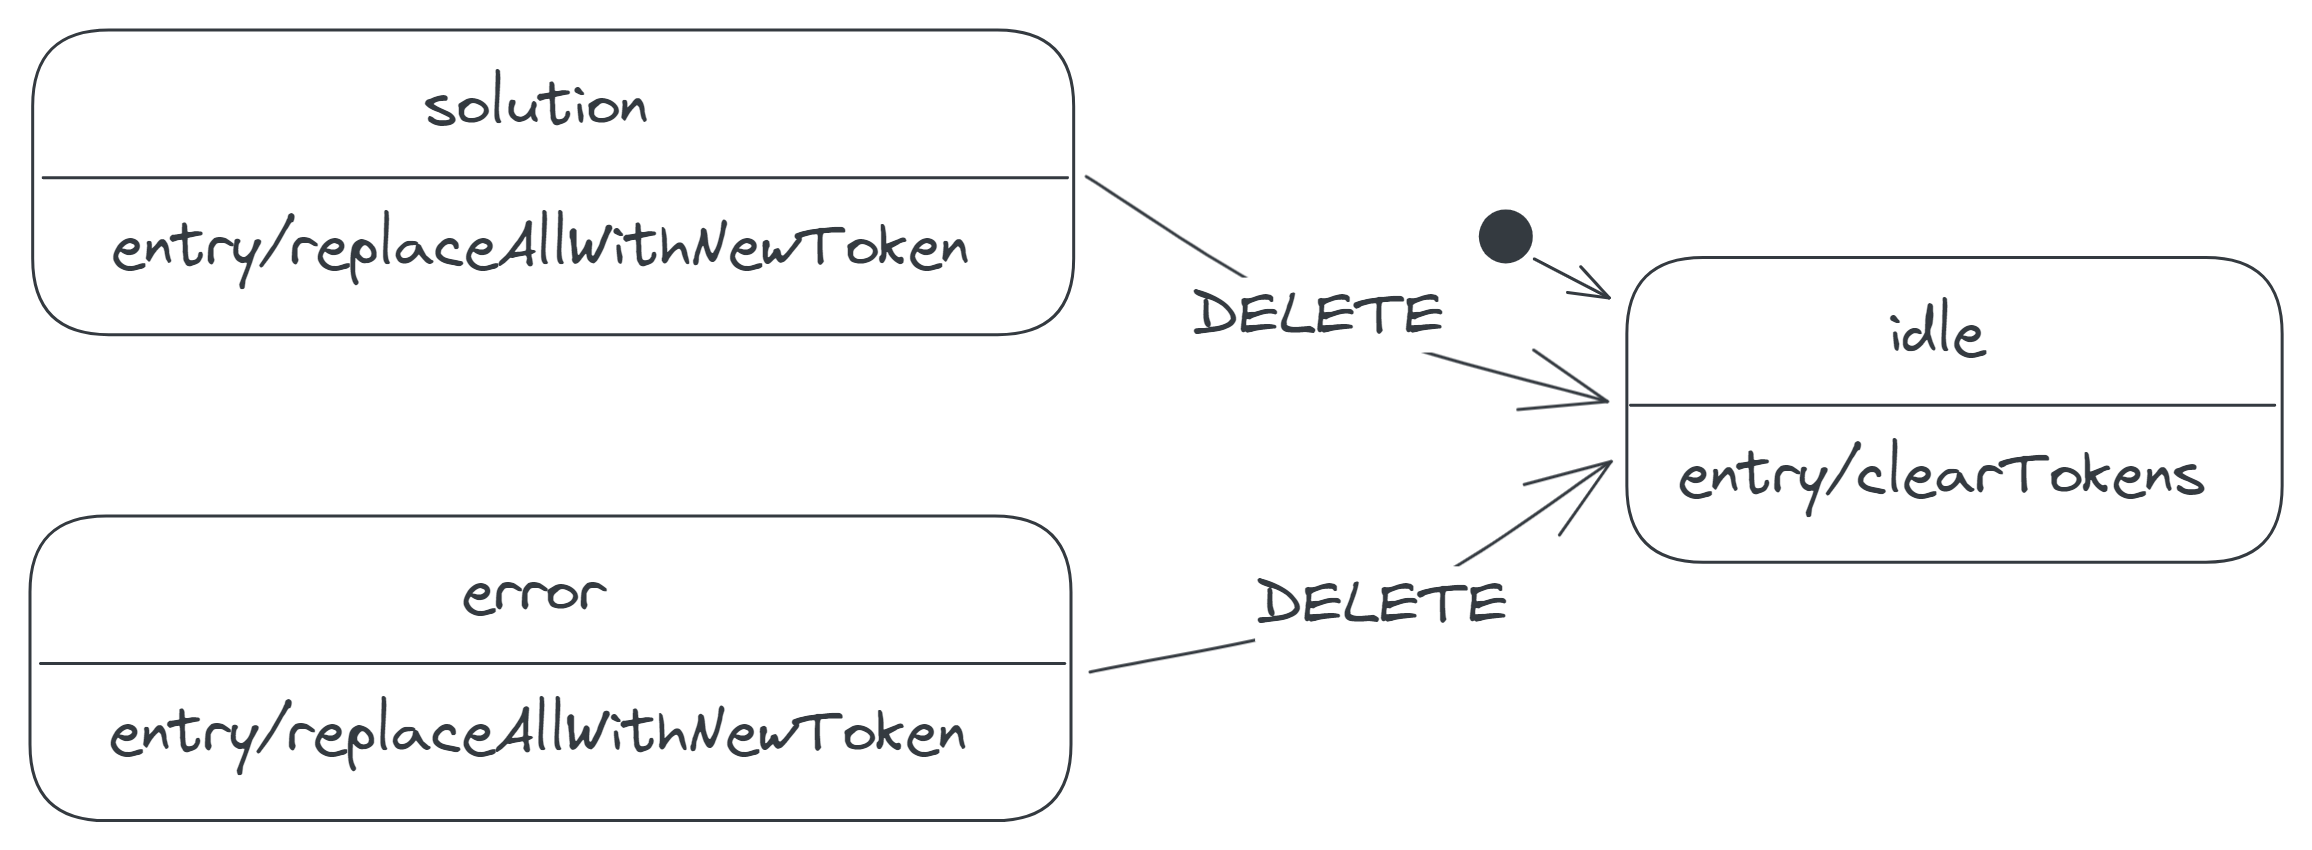 The DELETE transitions from the solution and error states to the idle state.